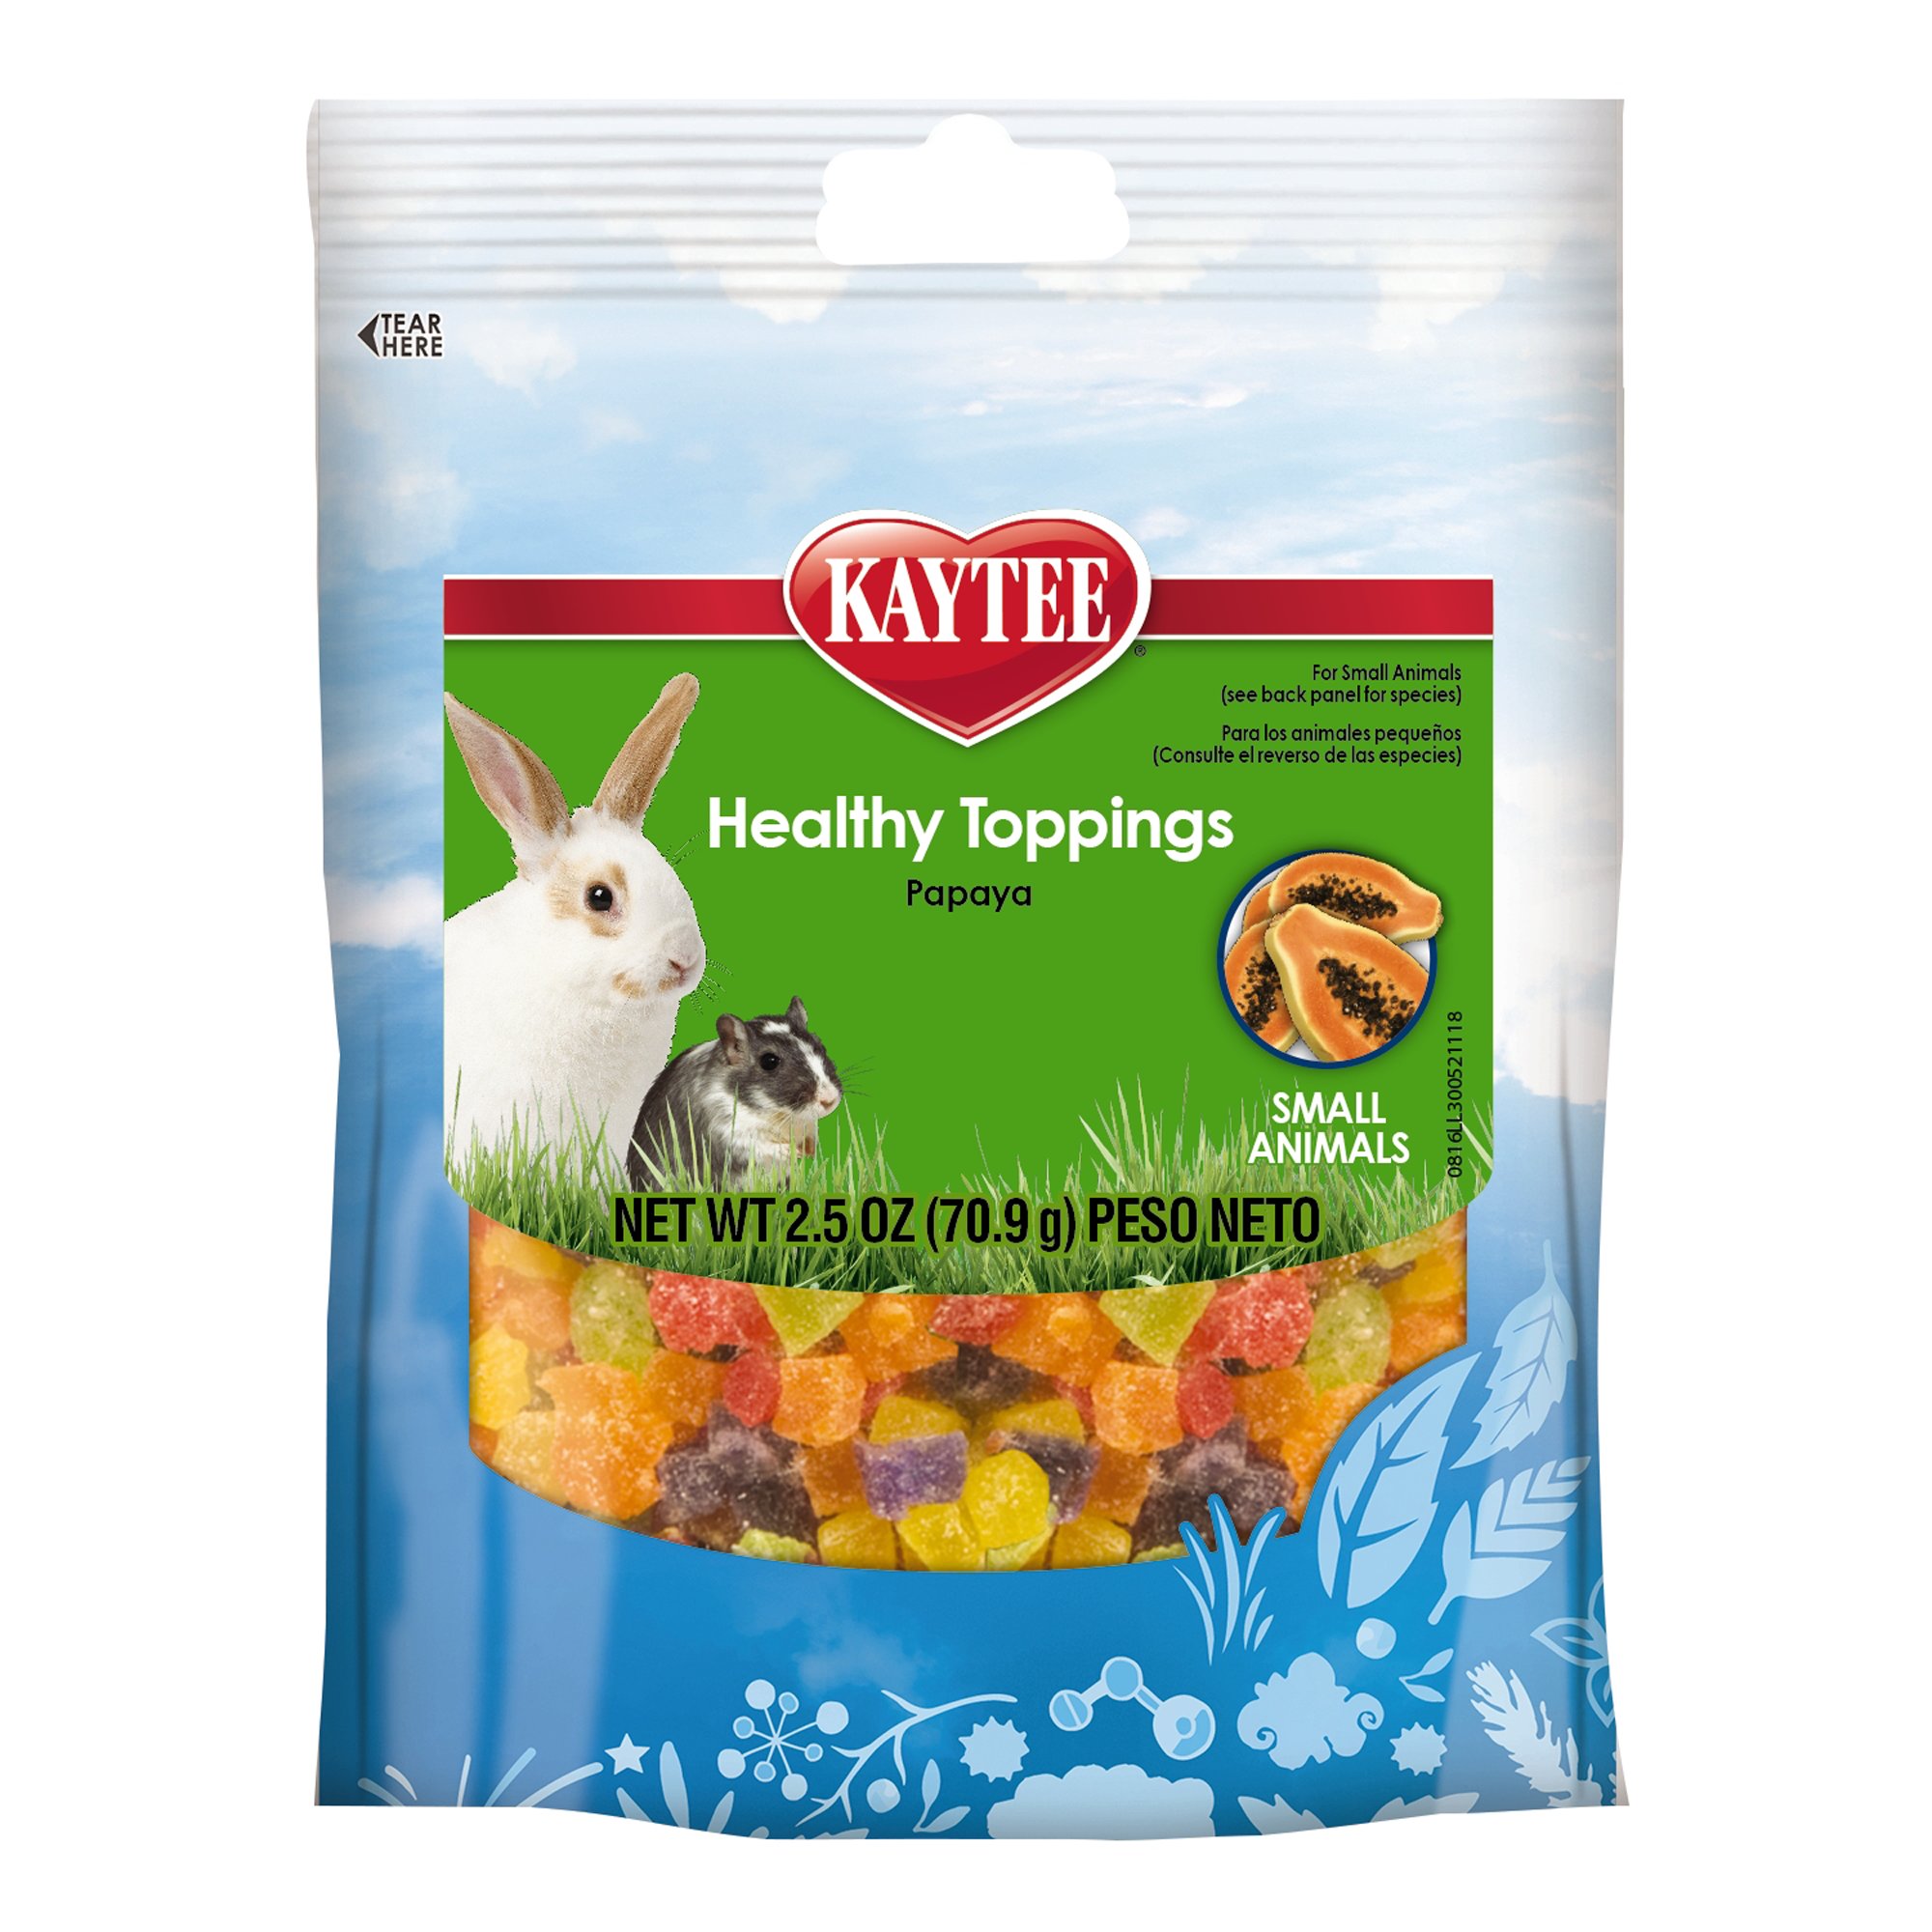 Kaytee Healthy Toppings for Small Animals | Petco